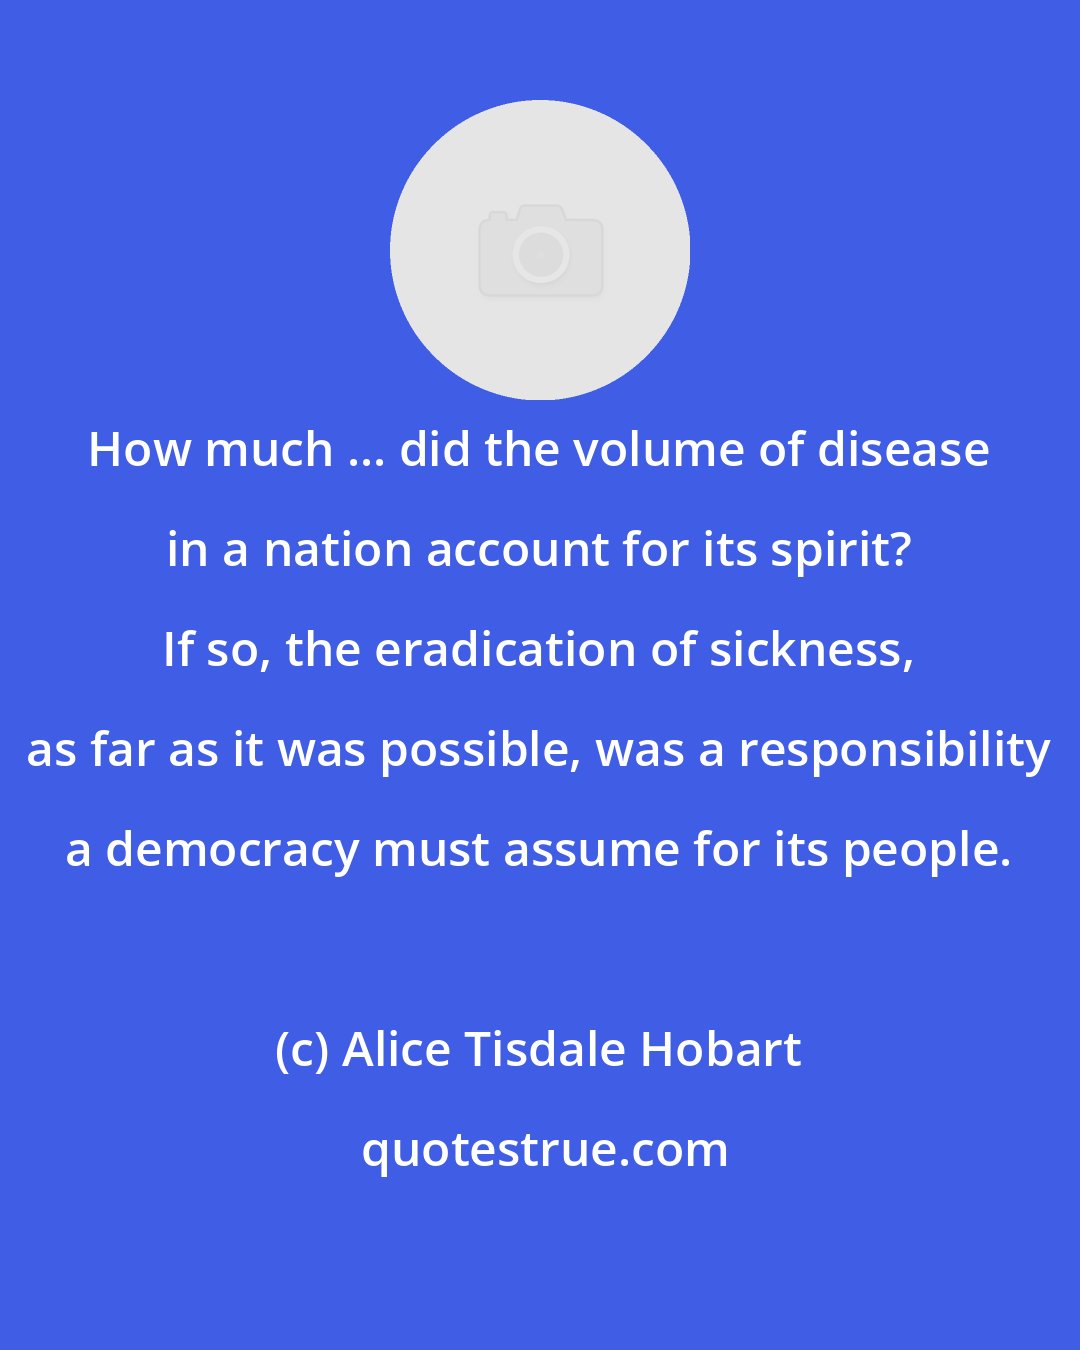 Alice Tisdale Hobart: How much ... did the volume of disease in a nation account for its spirit? If so, the eradication of sickness, as far as it was possible, was a responsibility a democracy must assume for its people.